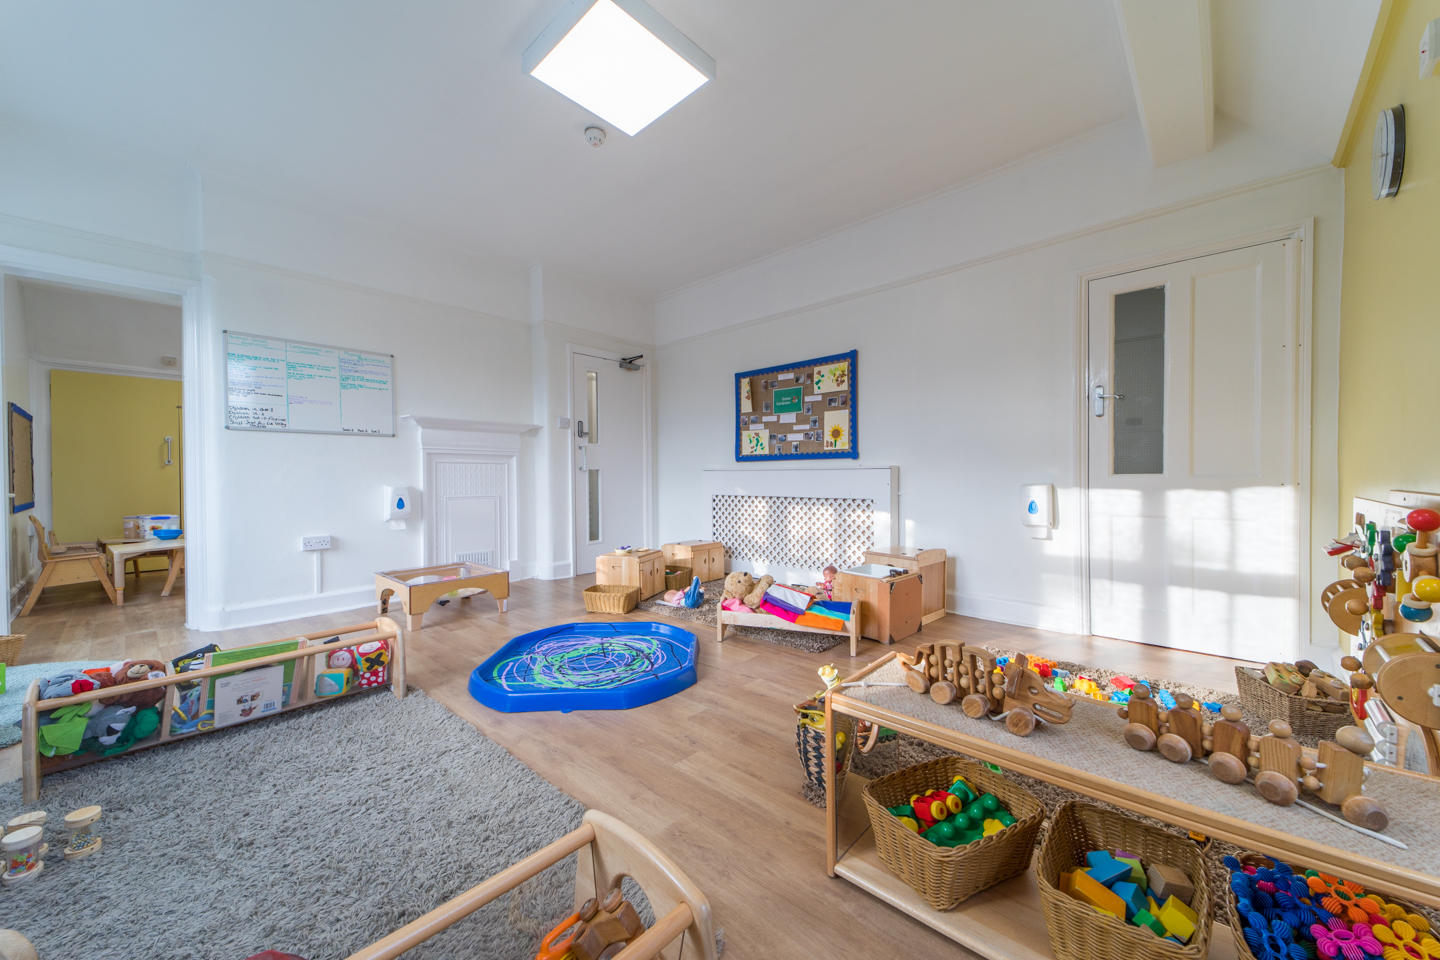 Images Bright Horizons The Park Day Nursery and Preschool